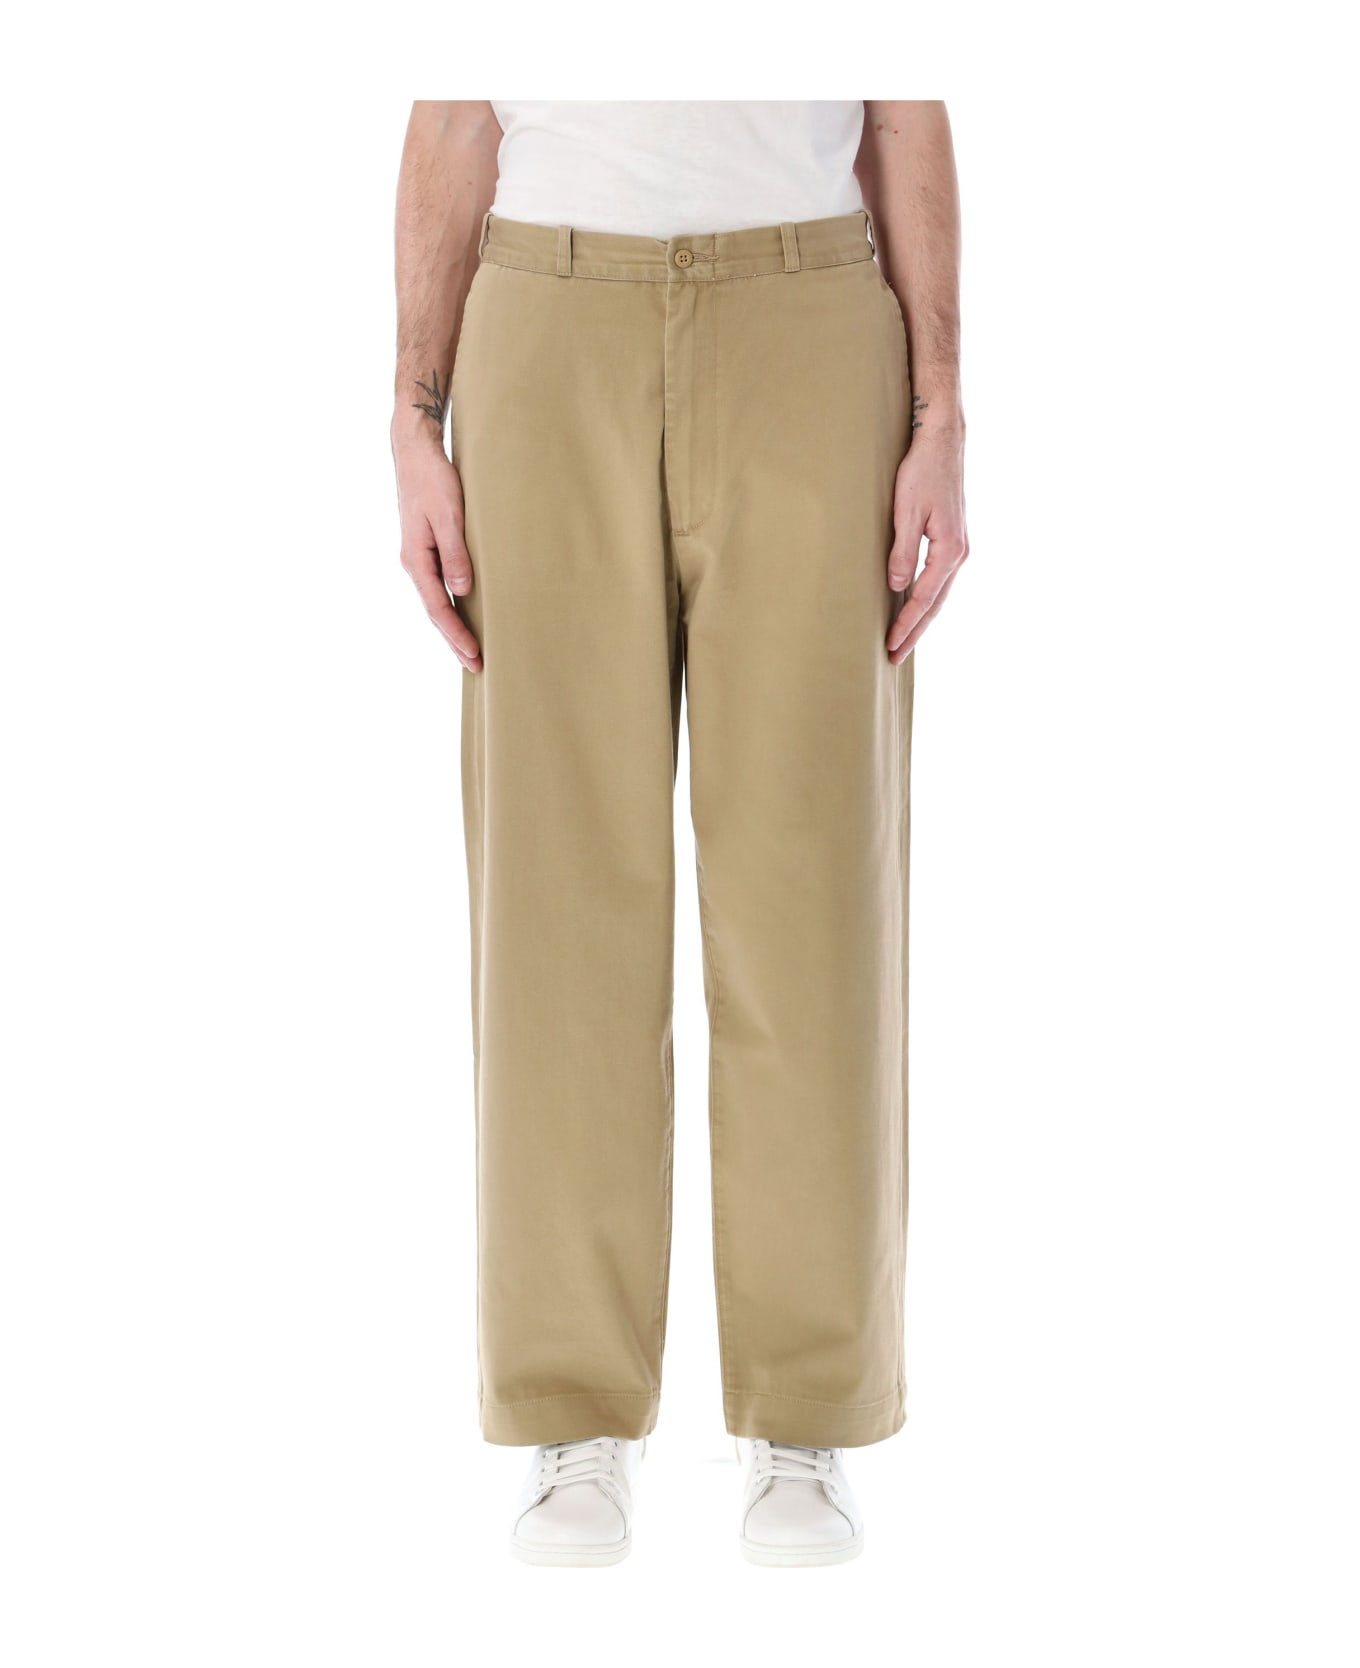 Levi's Skate Loose Chino - BEIGE ボトムス